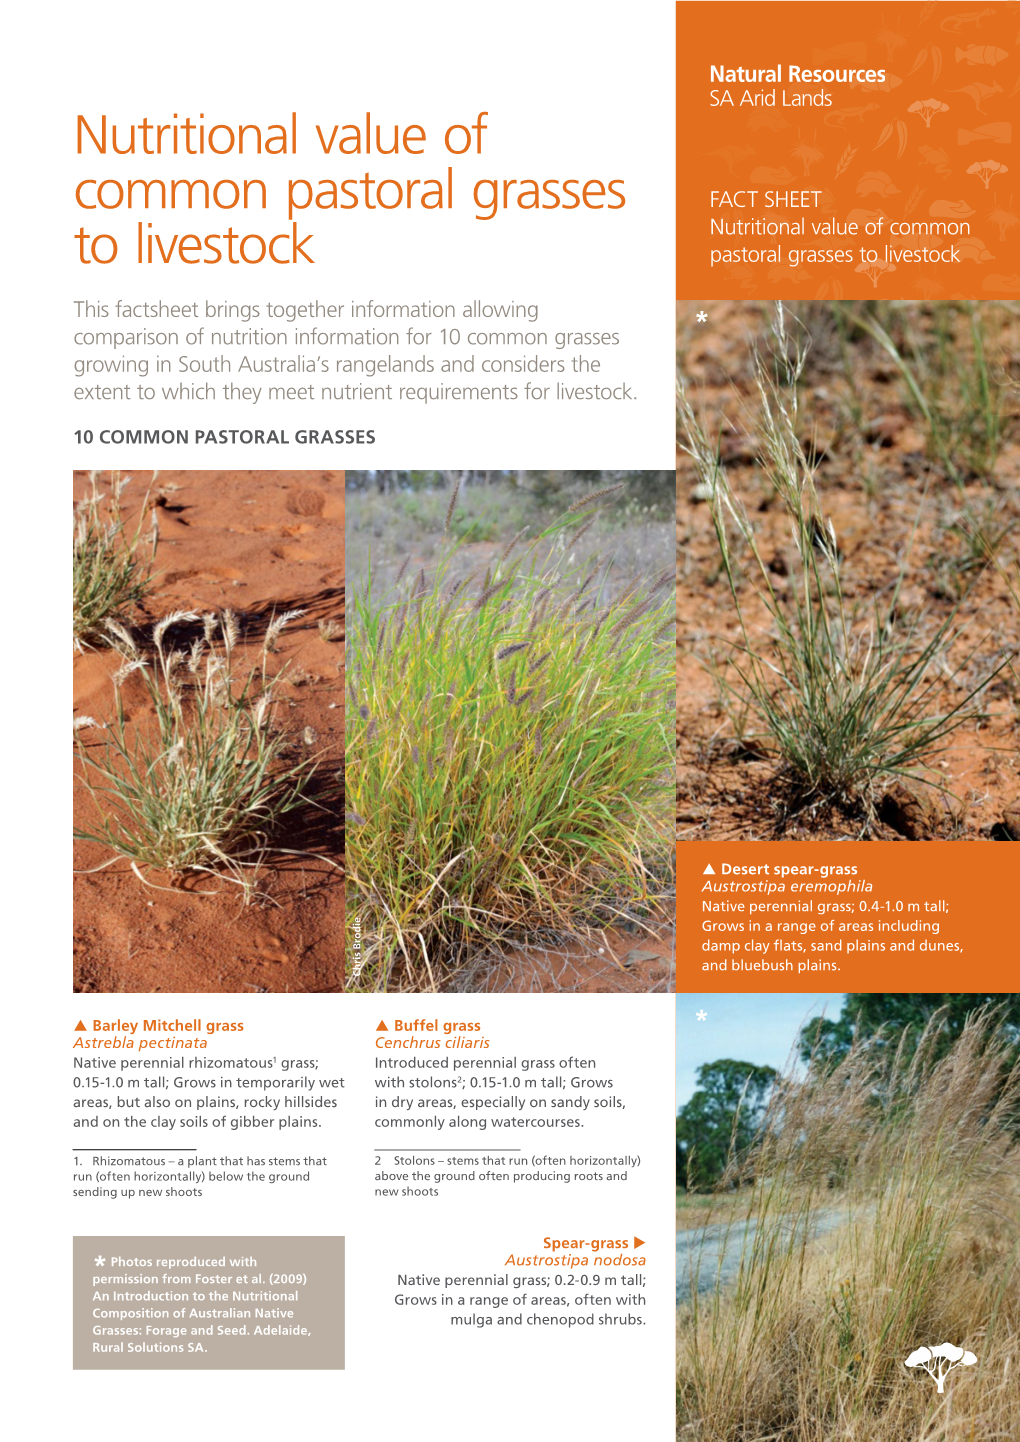 Nutritional Value of Common Pastoral Grasses to Livestock